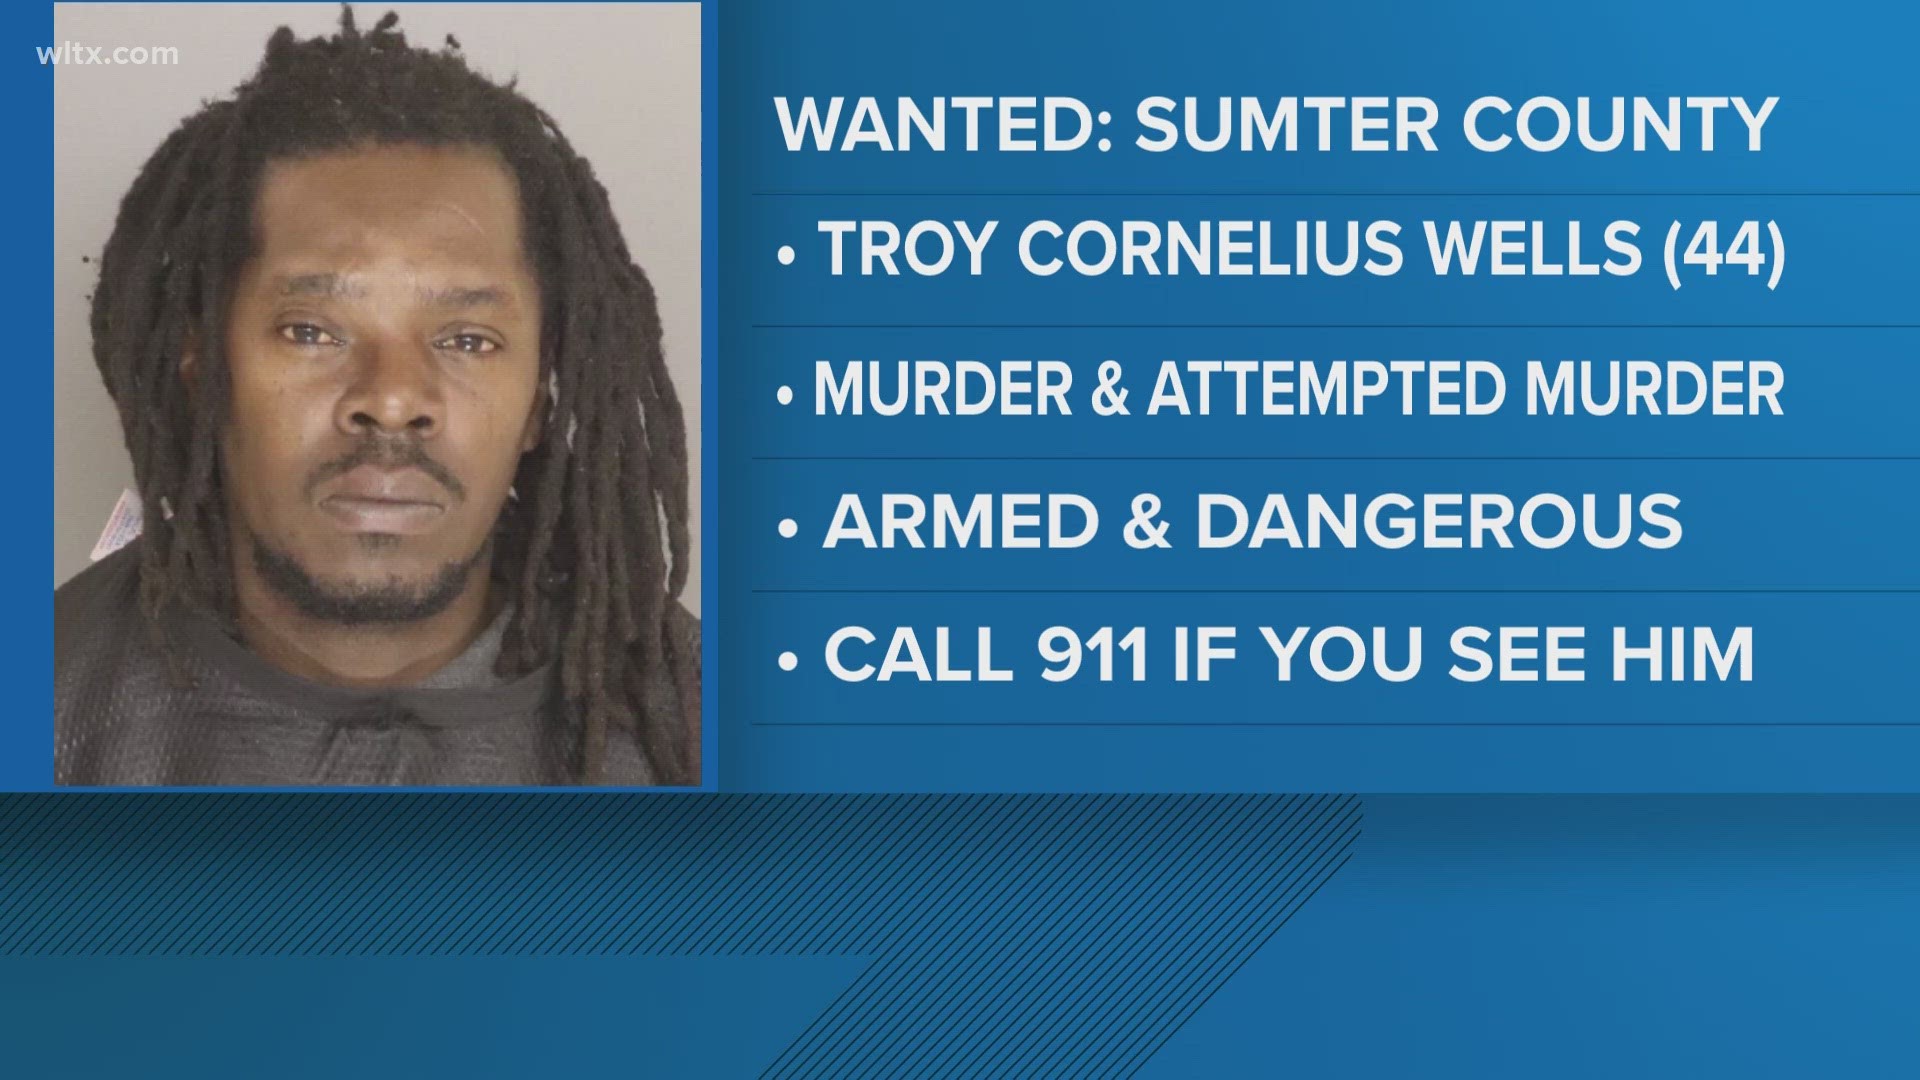 Troy Cornelius Wells, 44, is considered armed and dangerous and is wanted for murder, attempted murder in Sumter stemming from a shooting on Saturday.